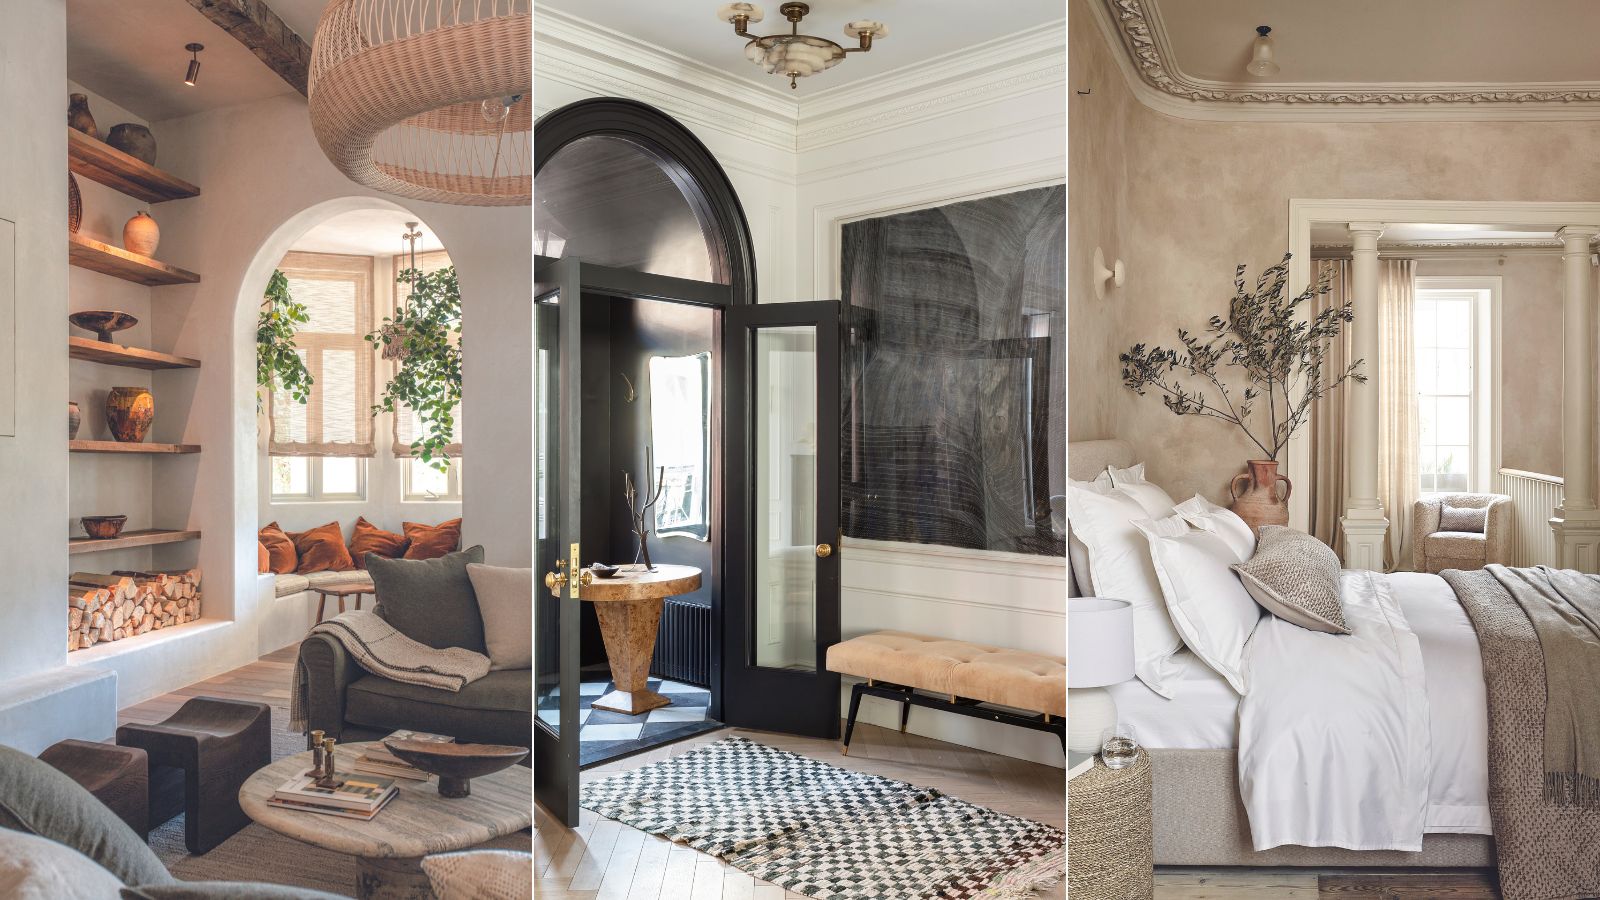 Five Luxury Home Items Every Million-Dollar+ Home Needs